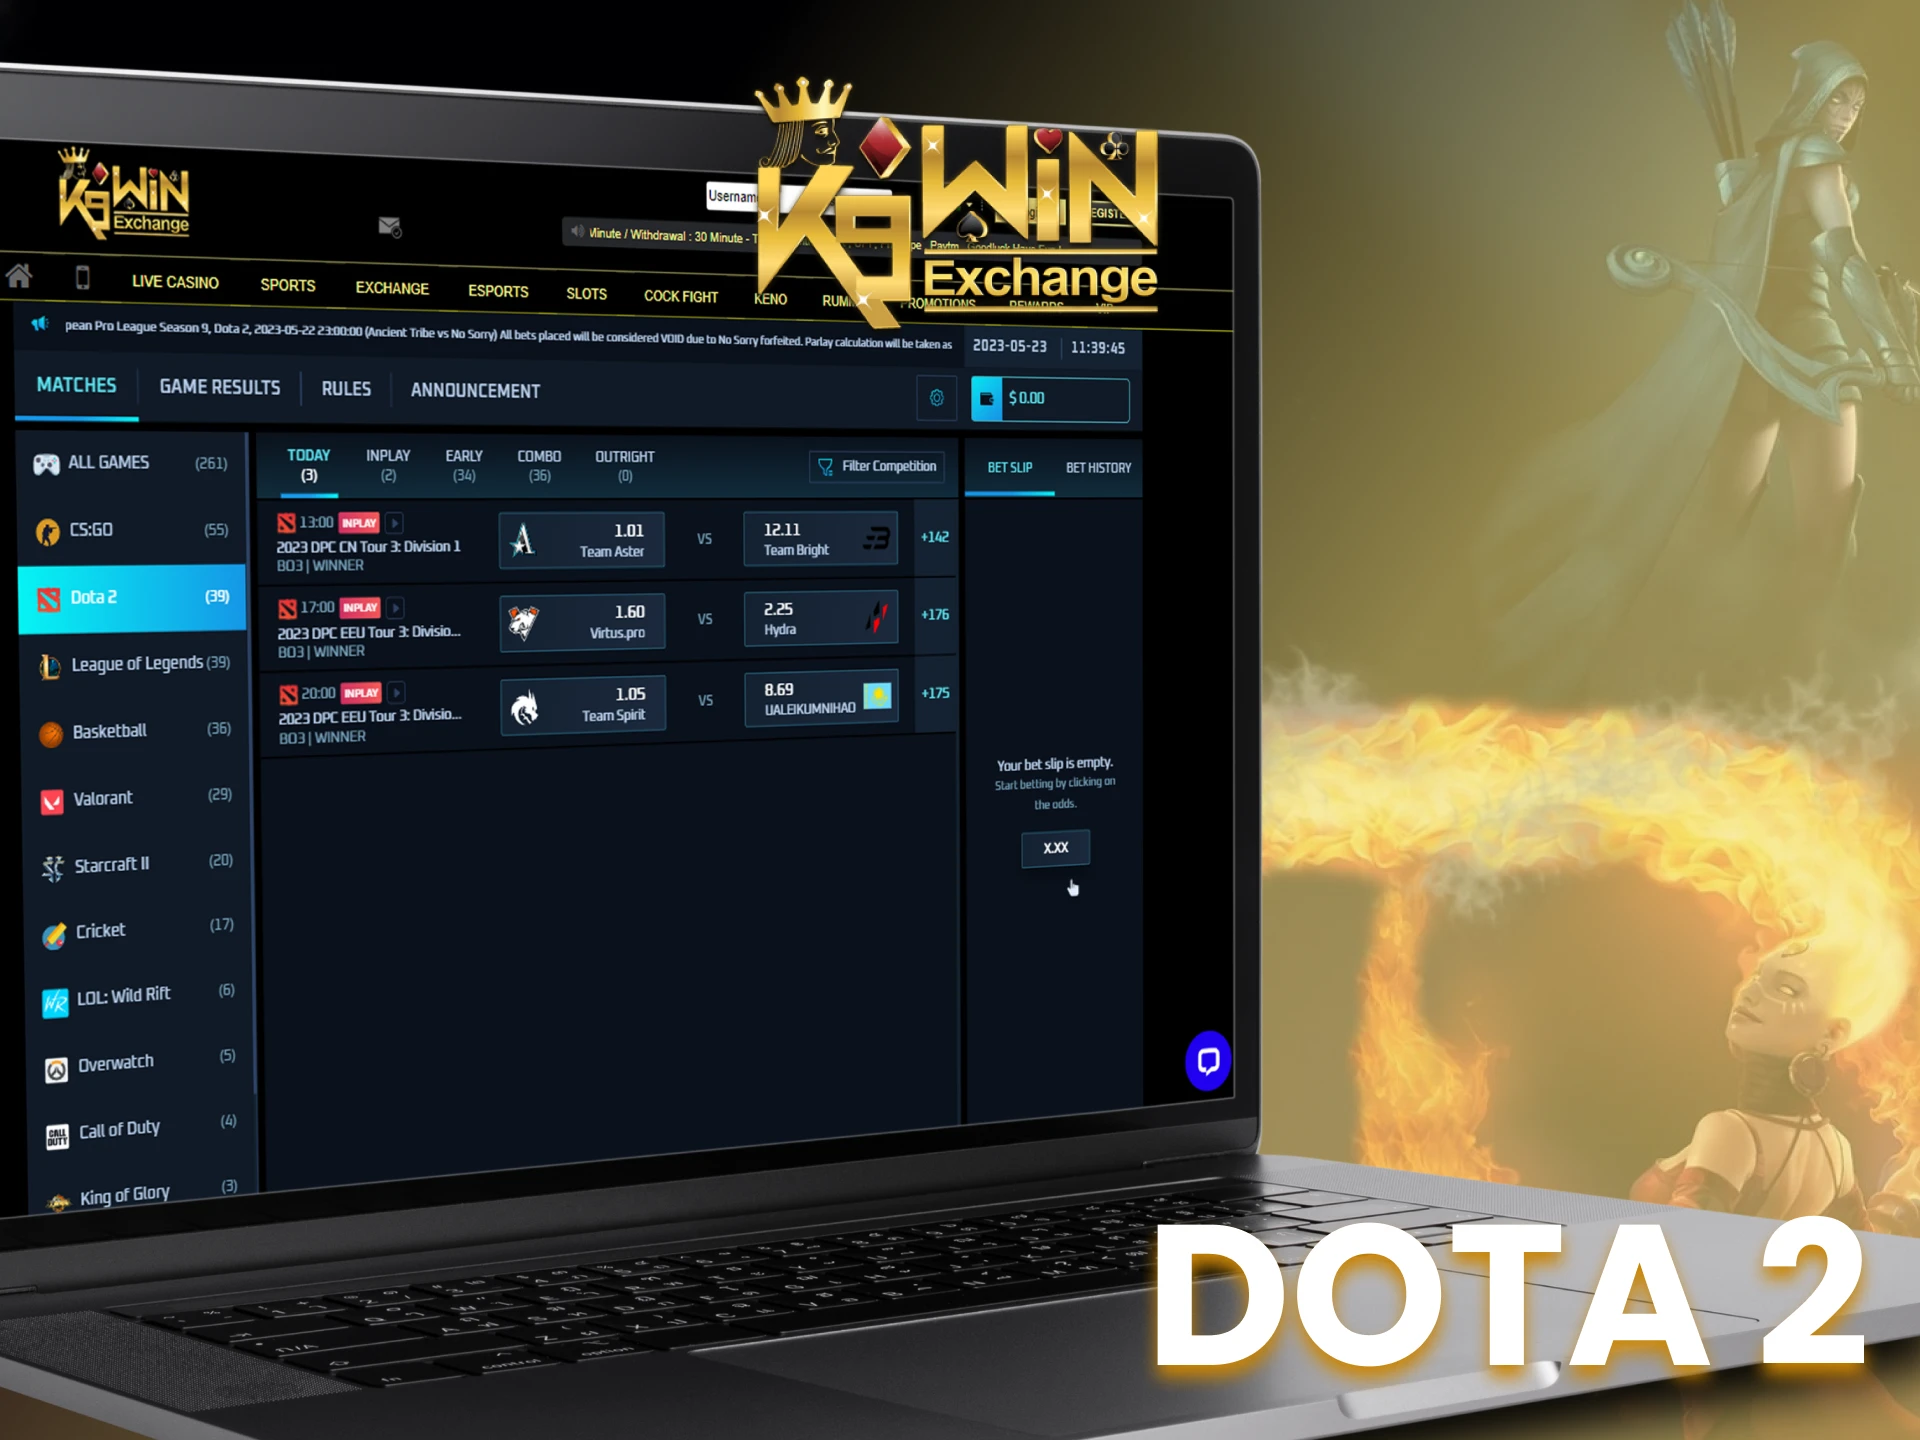 Check out the biggest Dota 2 tournaments on K9Win.